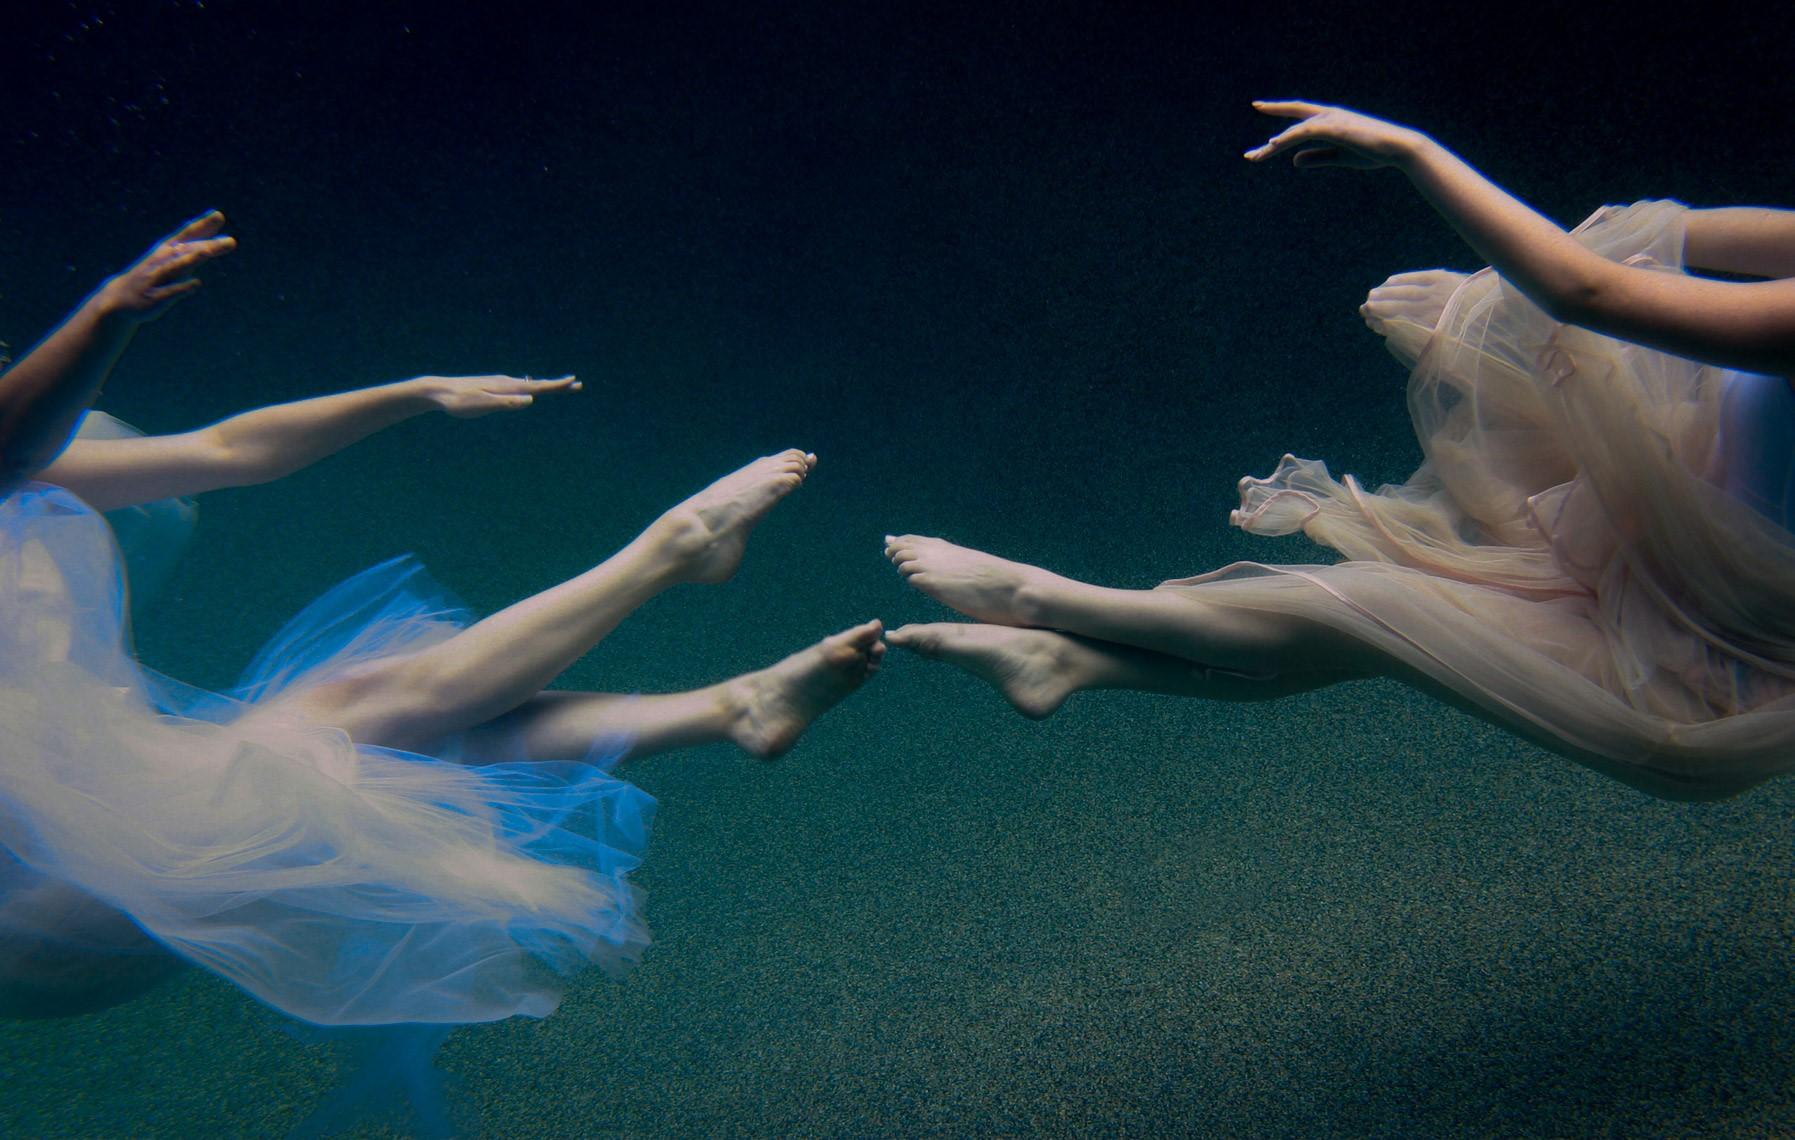 This contemporary figural limited edition photograph by Alyssa Fortin is a reinterpretation of the mythological story of Asopus' beautiful daughters who were abducted by gods to become nymphs of the spring. This image depicts two of the daughters